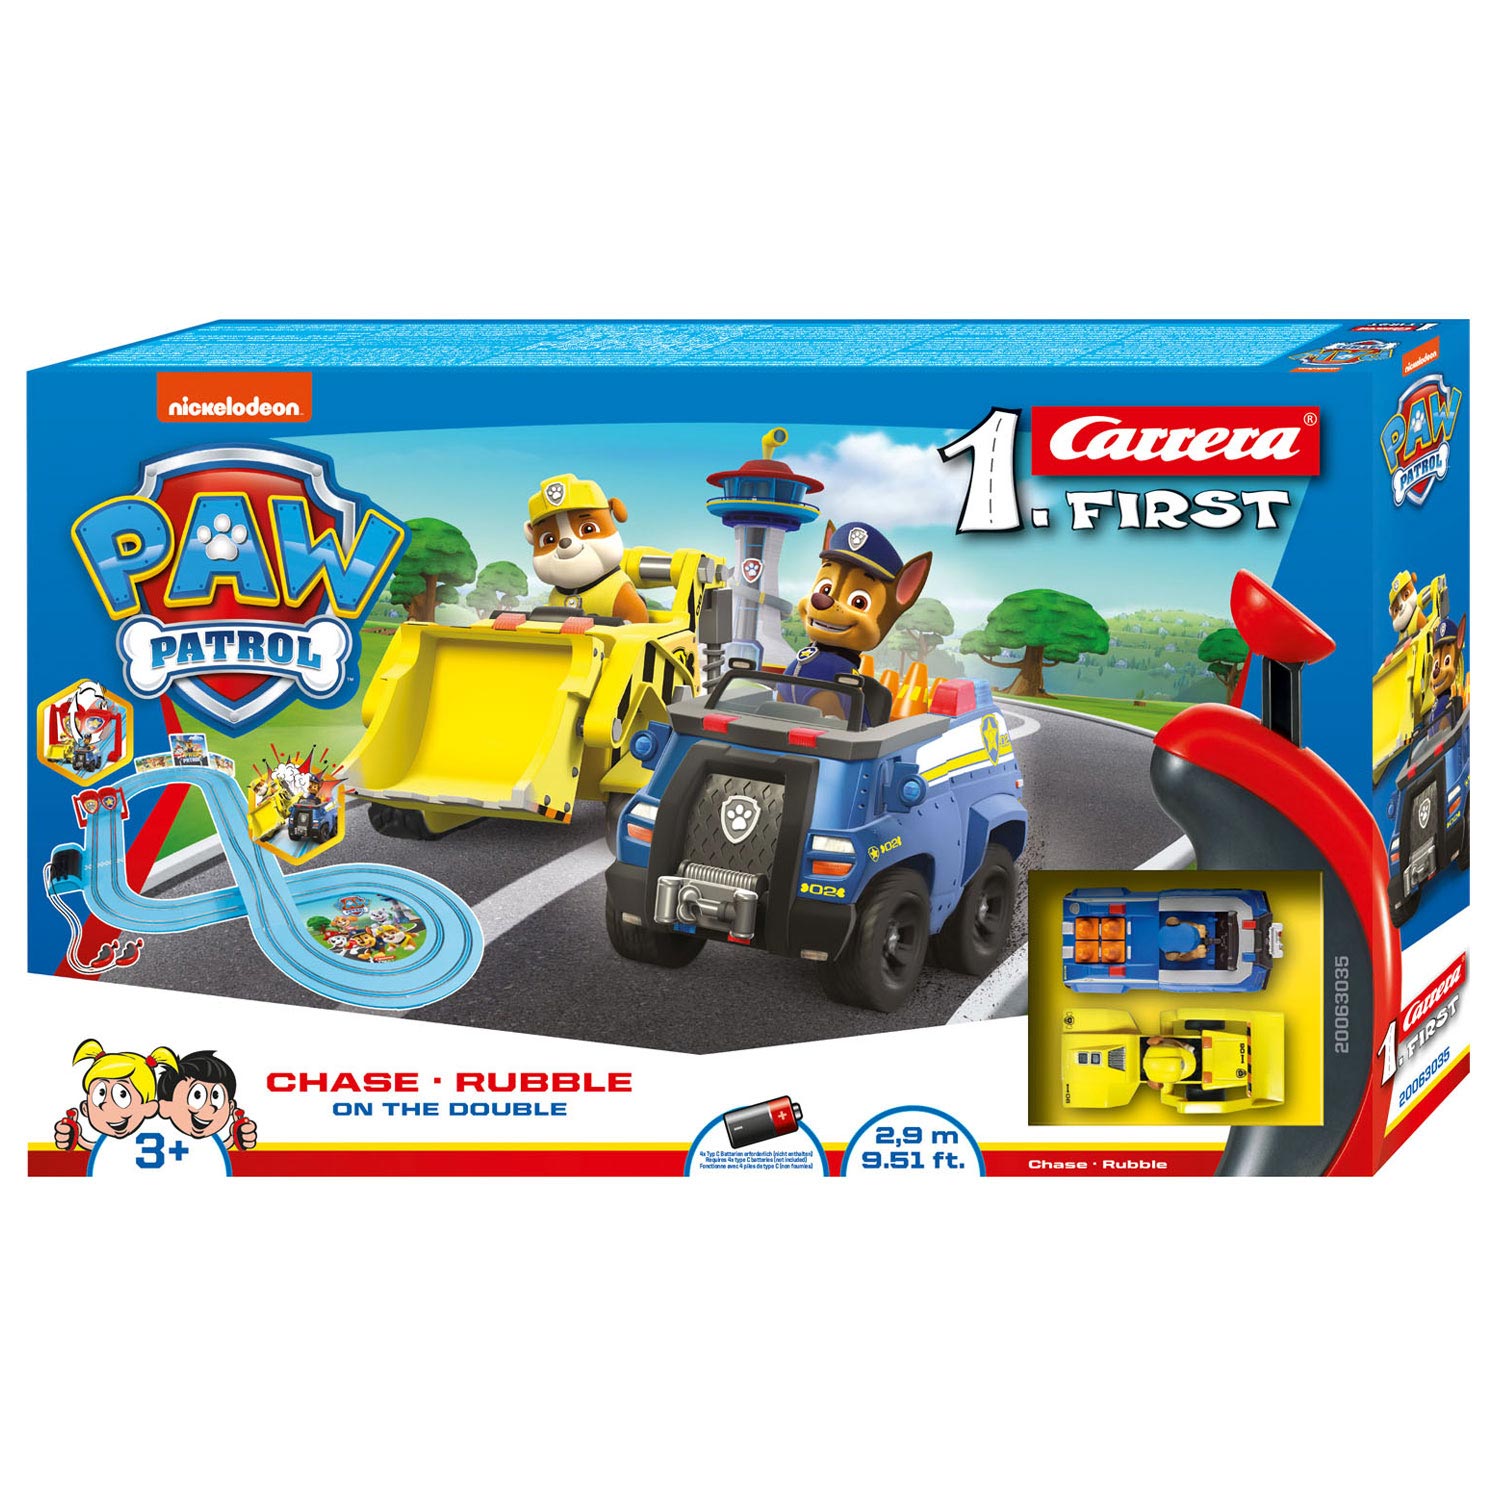 Carrera First Racebaan - Paw Patrol 'On the Double'